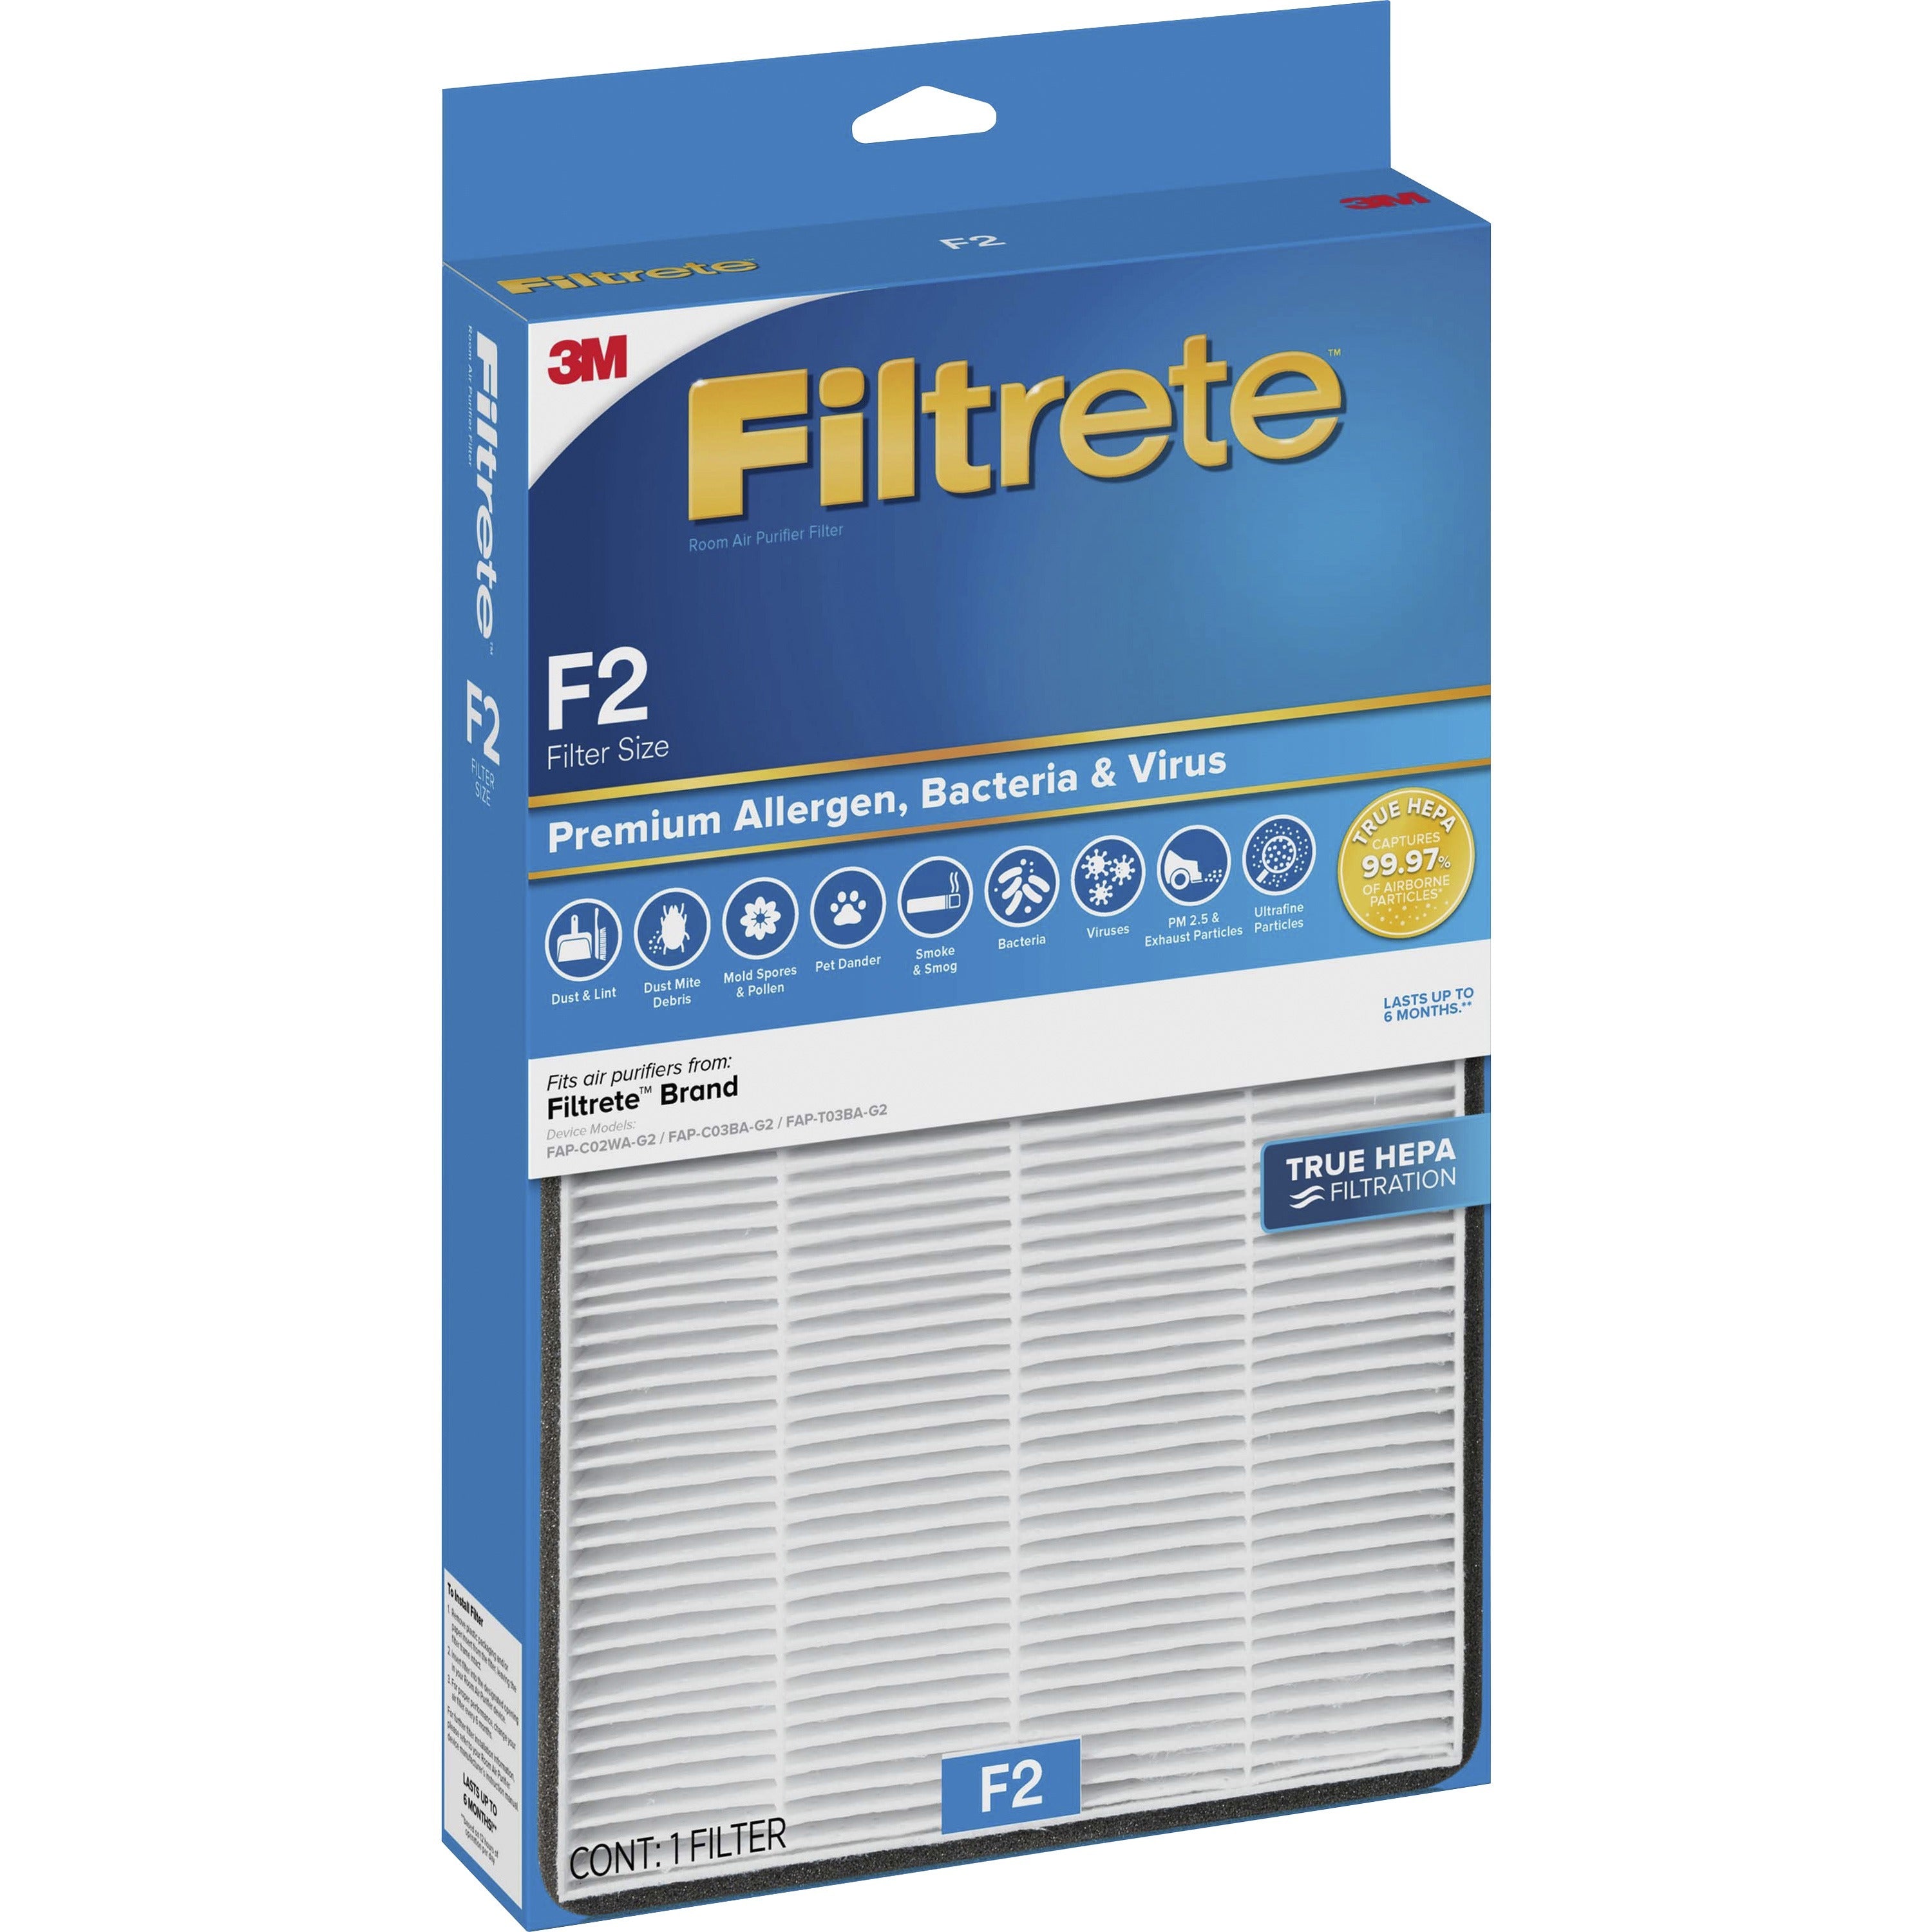 filtrete-air-filter-hepa-for-air-purifier-remove-allergens-remove-bacteria-remove-virus-particlesf2-filter-grade-82-height-x-13-width-polypropylene_mmmfapff2n4 - 4